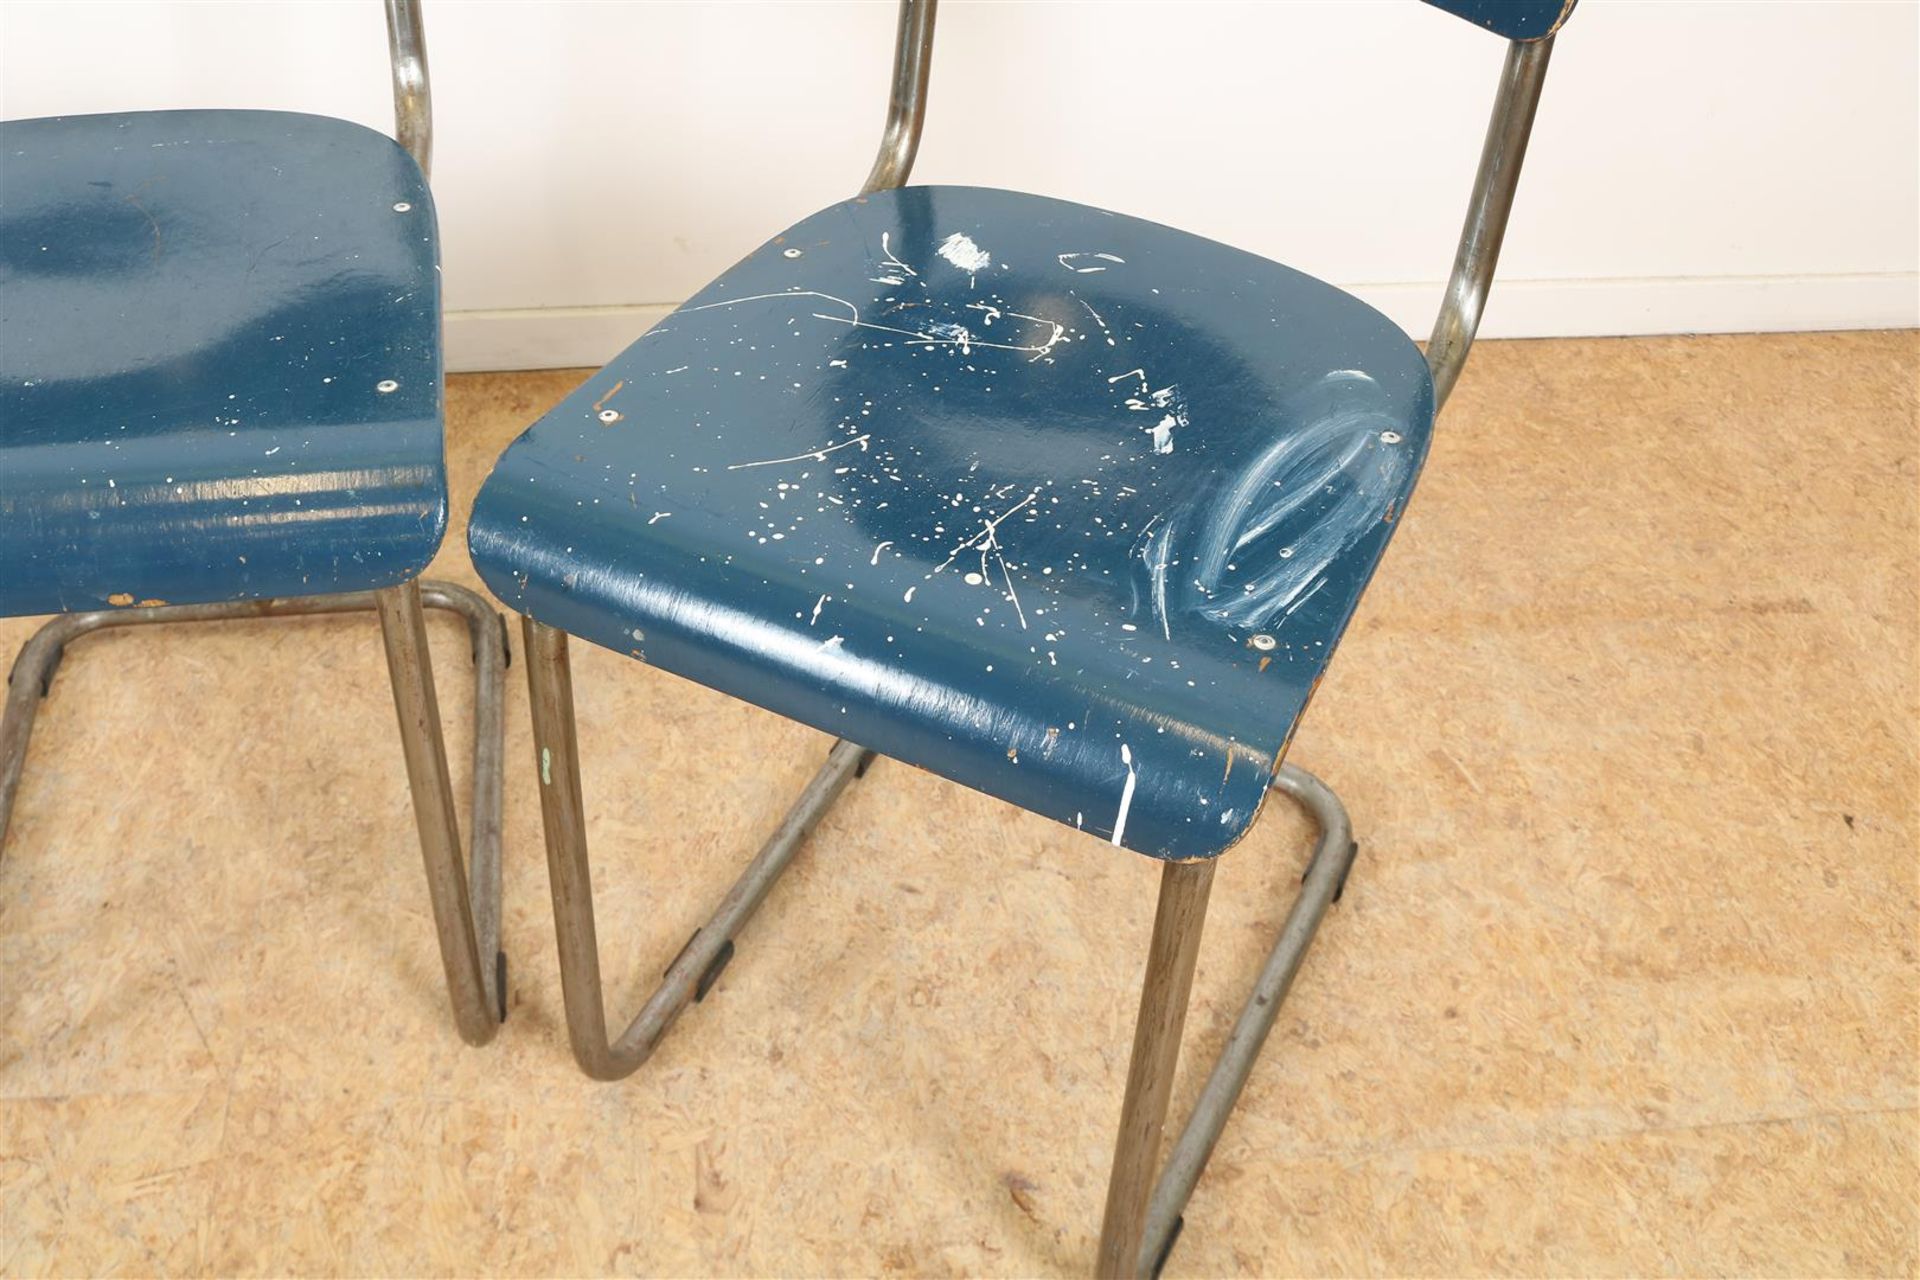 Series of 4 chrome tube Gispen chairs with blue wooden seat and backrest, model 107, produced - Image 3 of 4